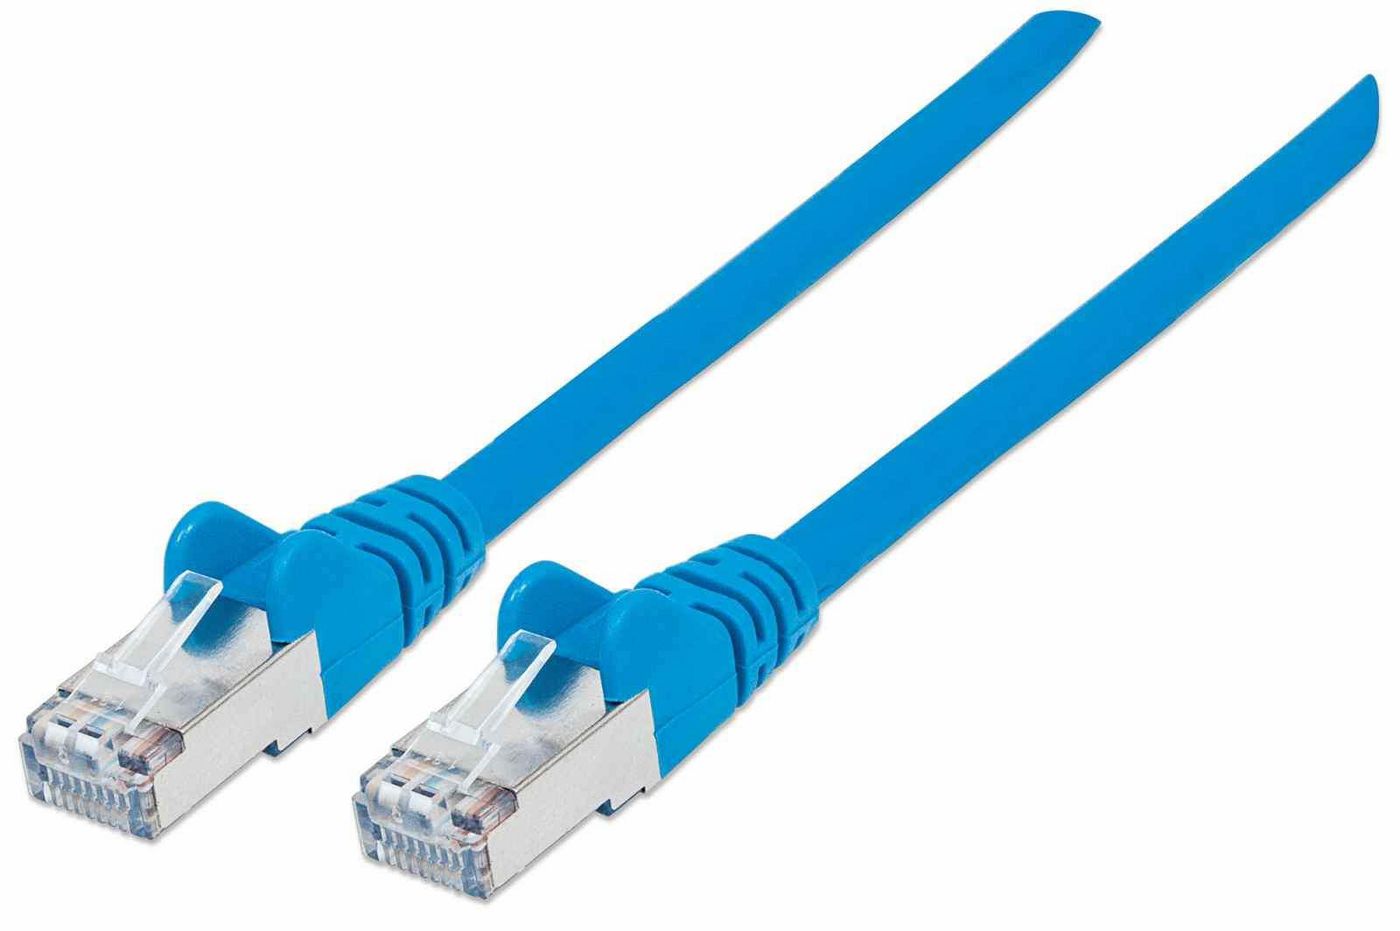 Intellinet 740975 High Performance Network Cable 